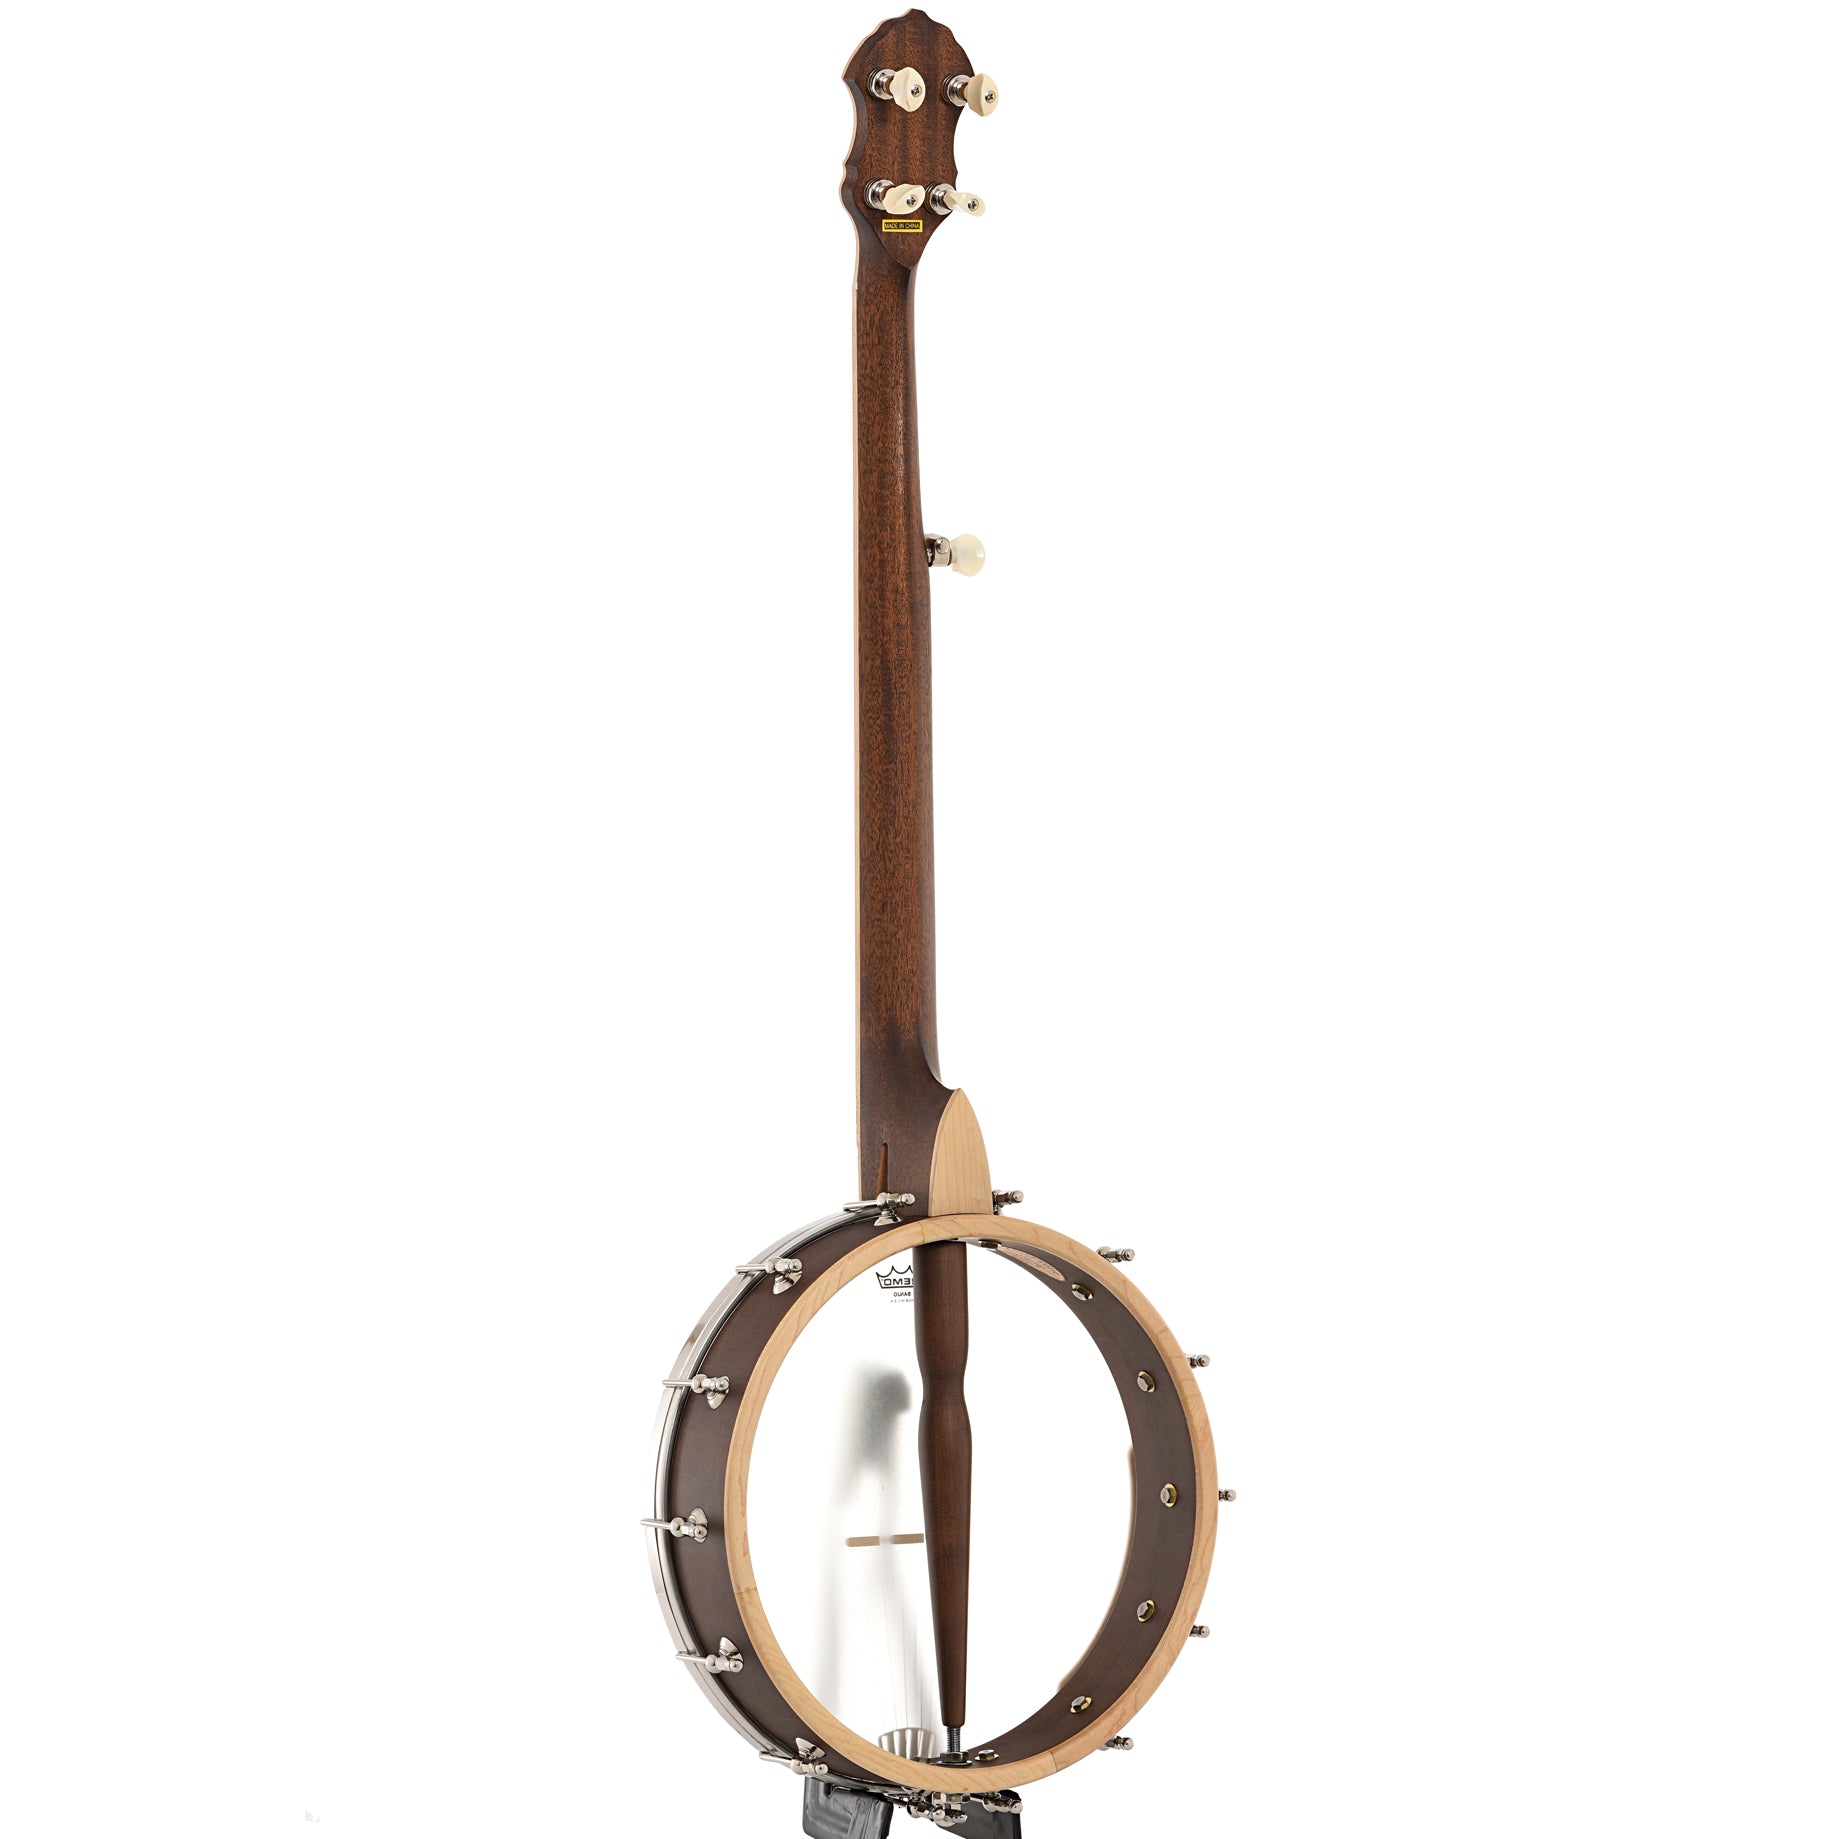 Full back and side of Gold Tone HM-100 High Moon Openback Banjo